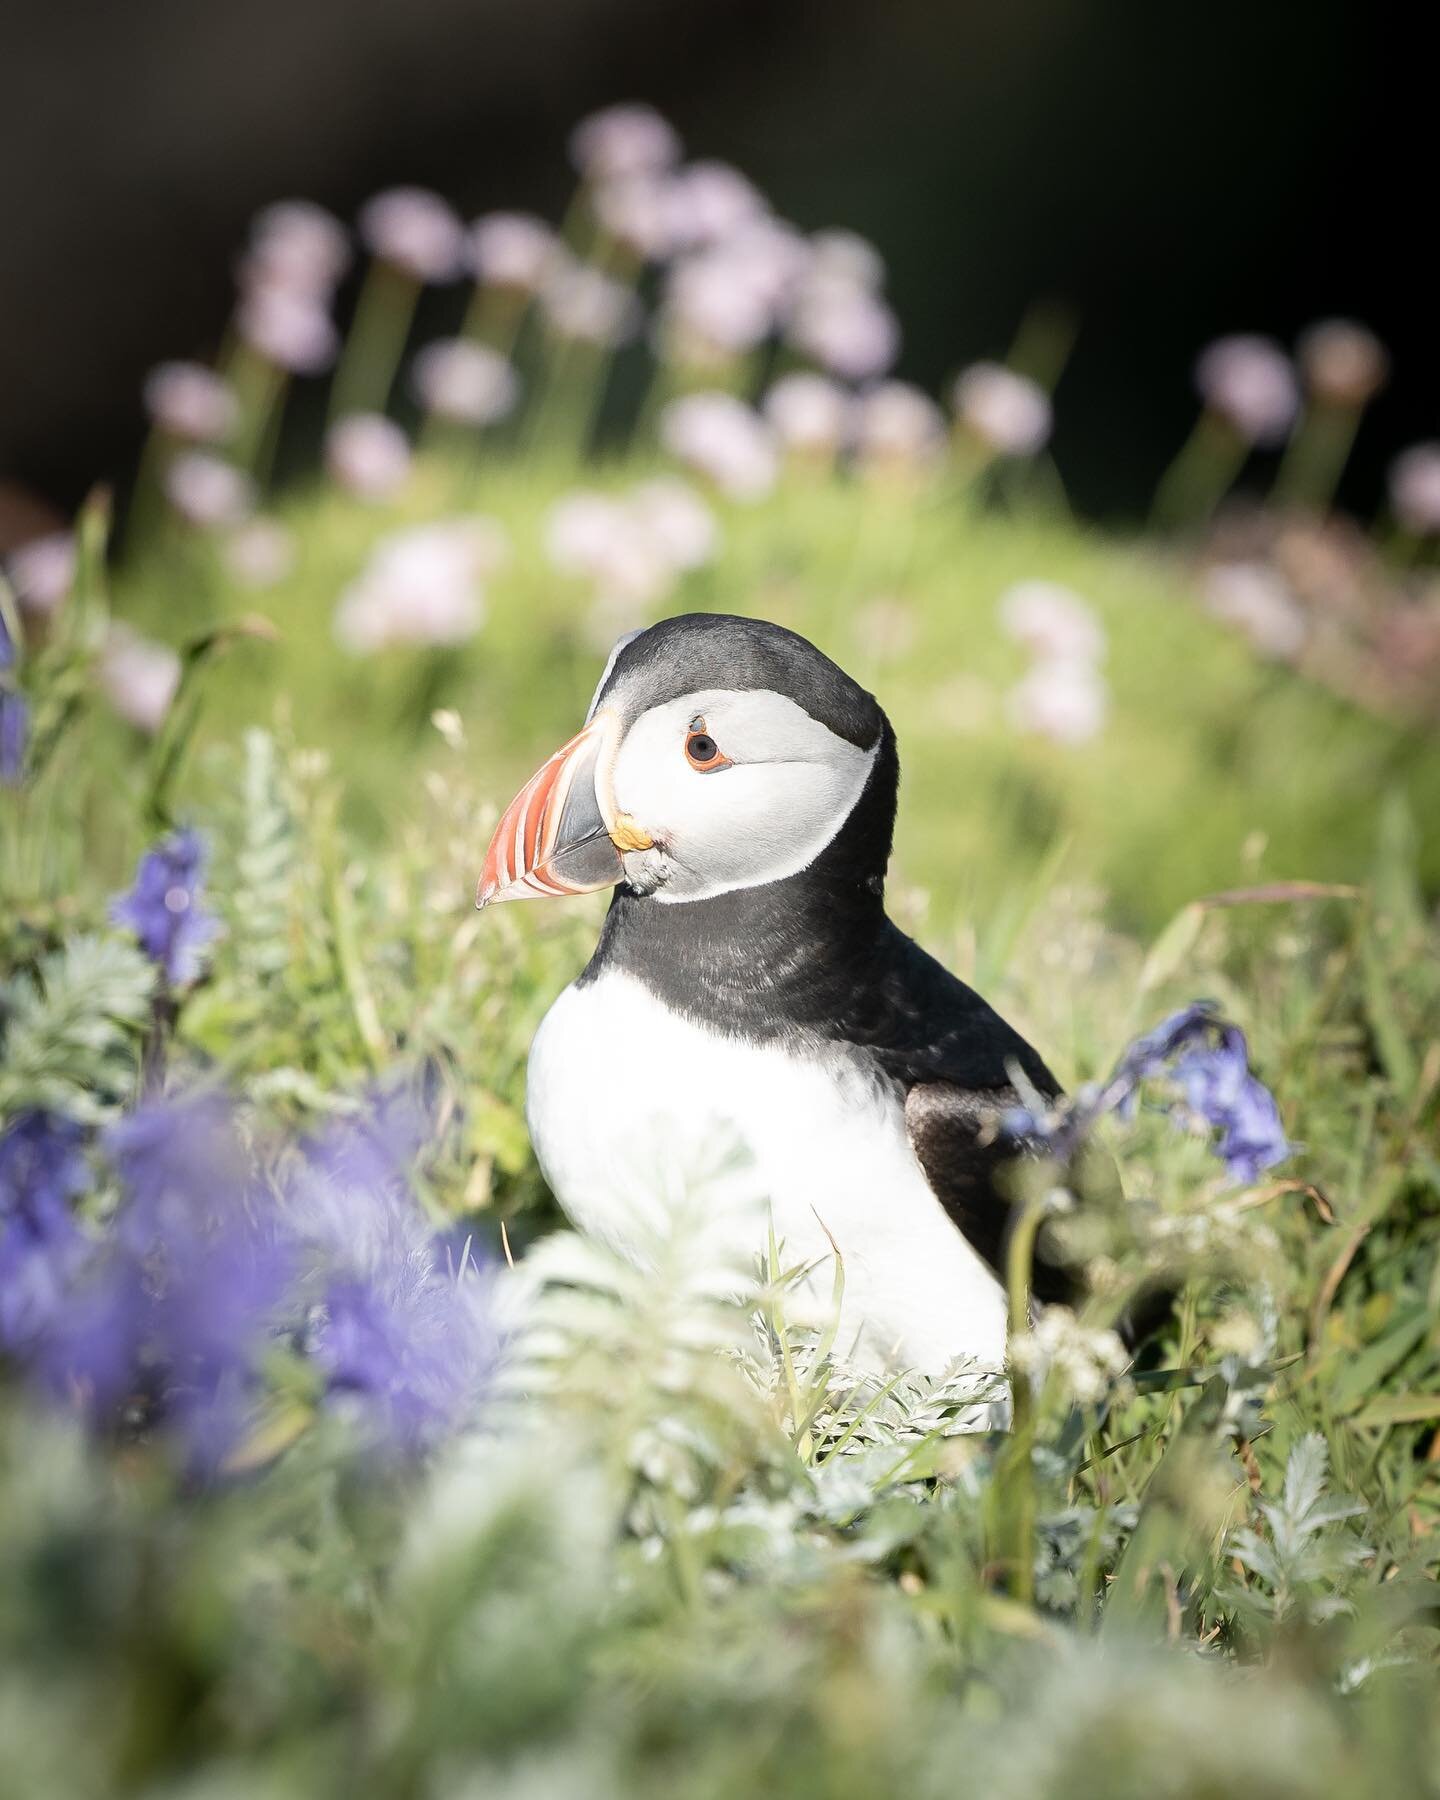 One cheeky Staffa Puffin amongst bluebells and  thrifts 🌸 

British Coastline at its finest.